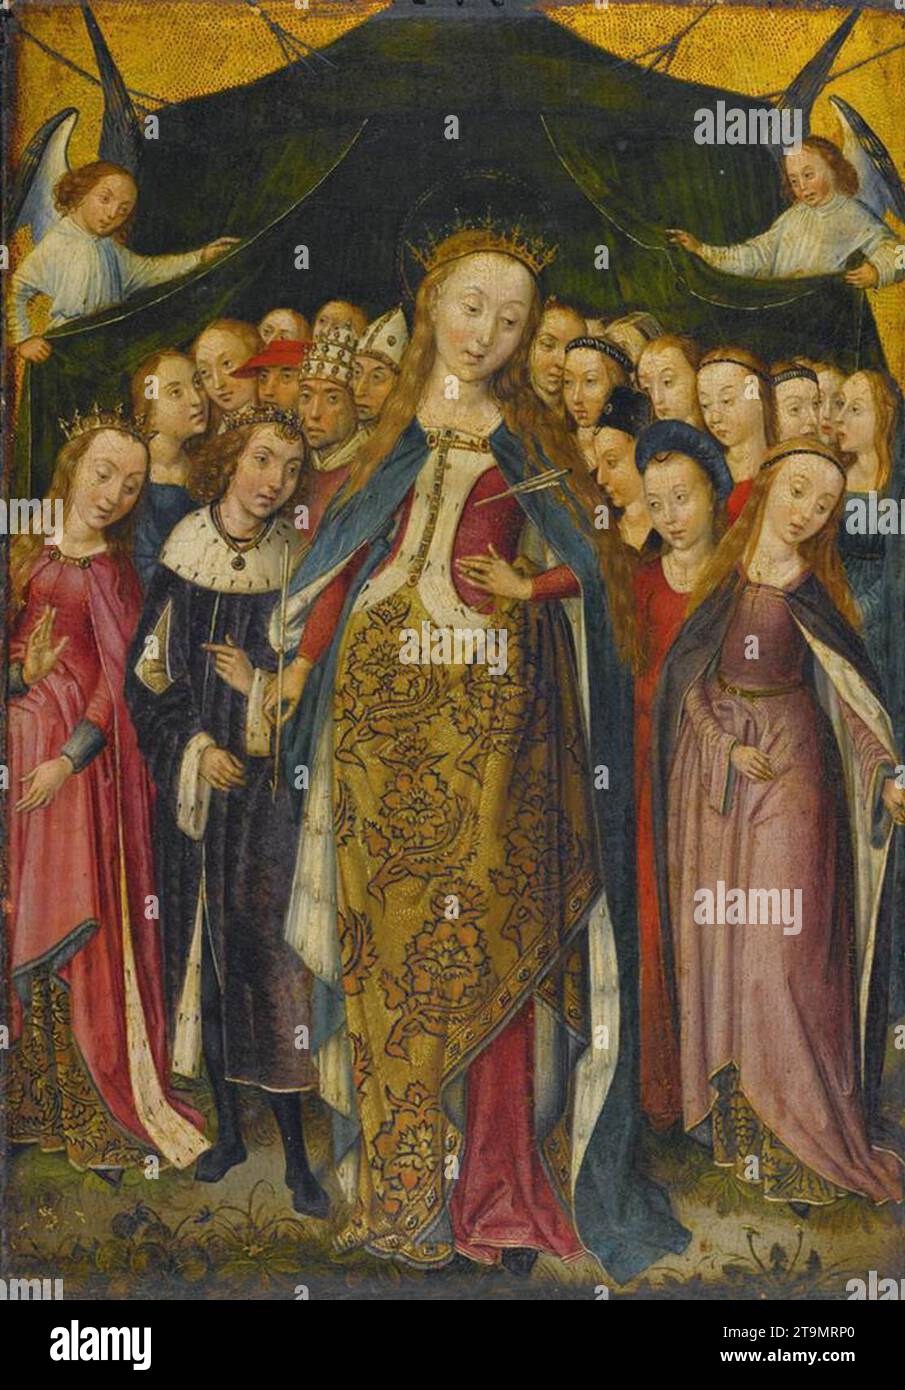 St Ursula Protecting the Eleven Thousand Virgins with Her Cloak 1470-1500 by Master Of The Legend Of Saint Barbara Stock Photo